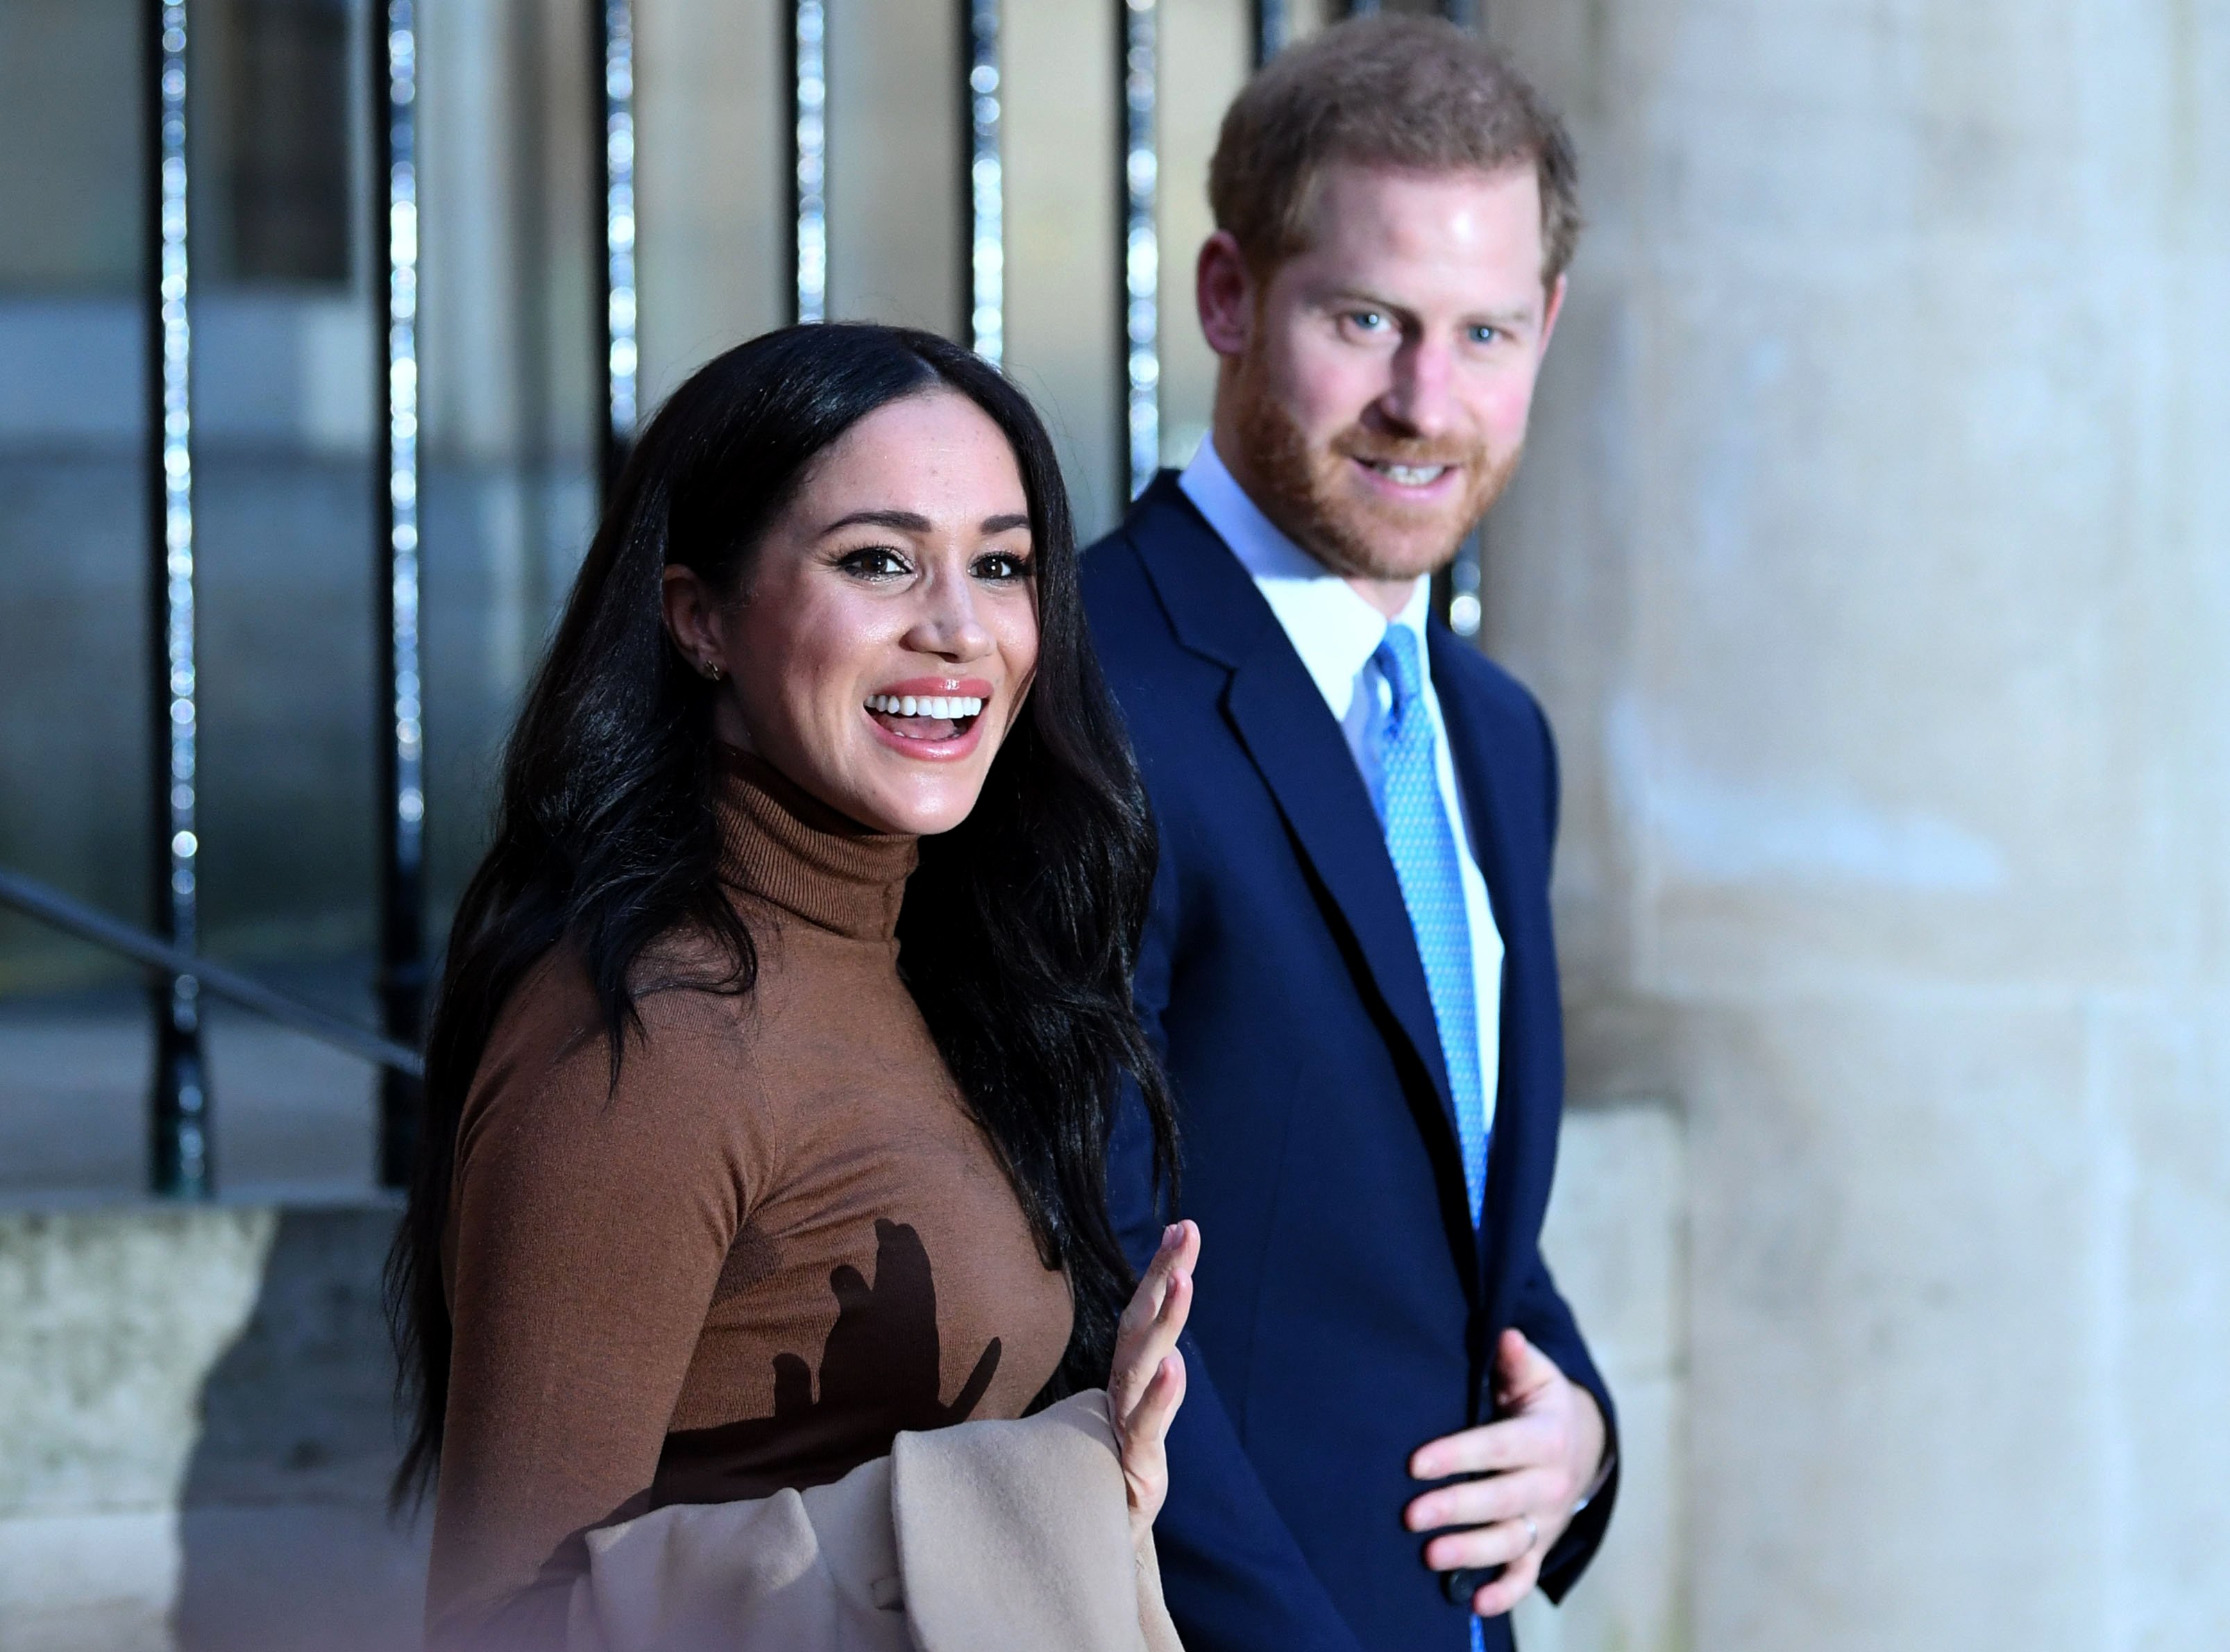 Prince Harry and Meghan Markle smile for cameras after visit to Canada House